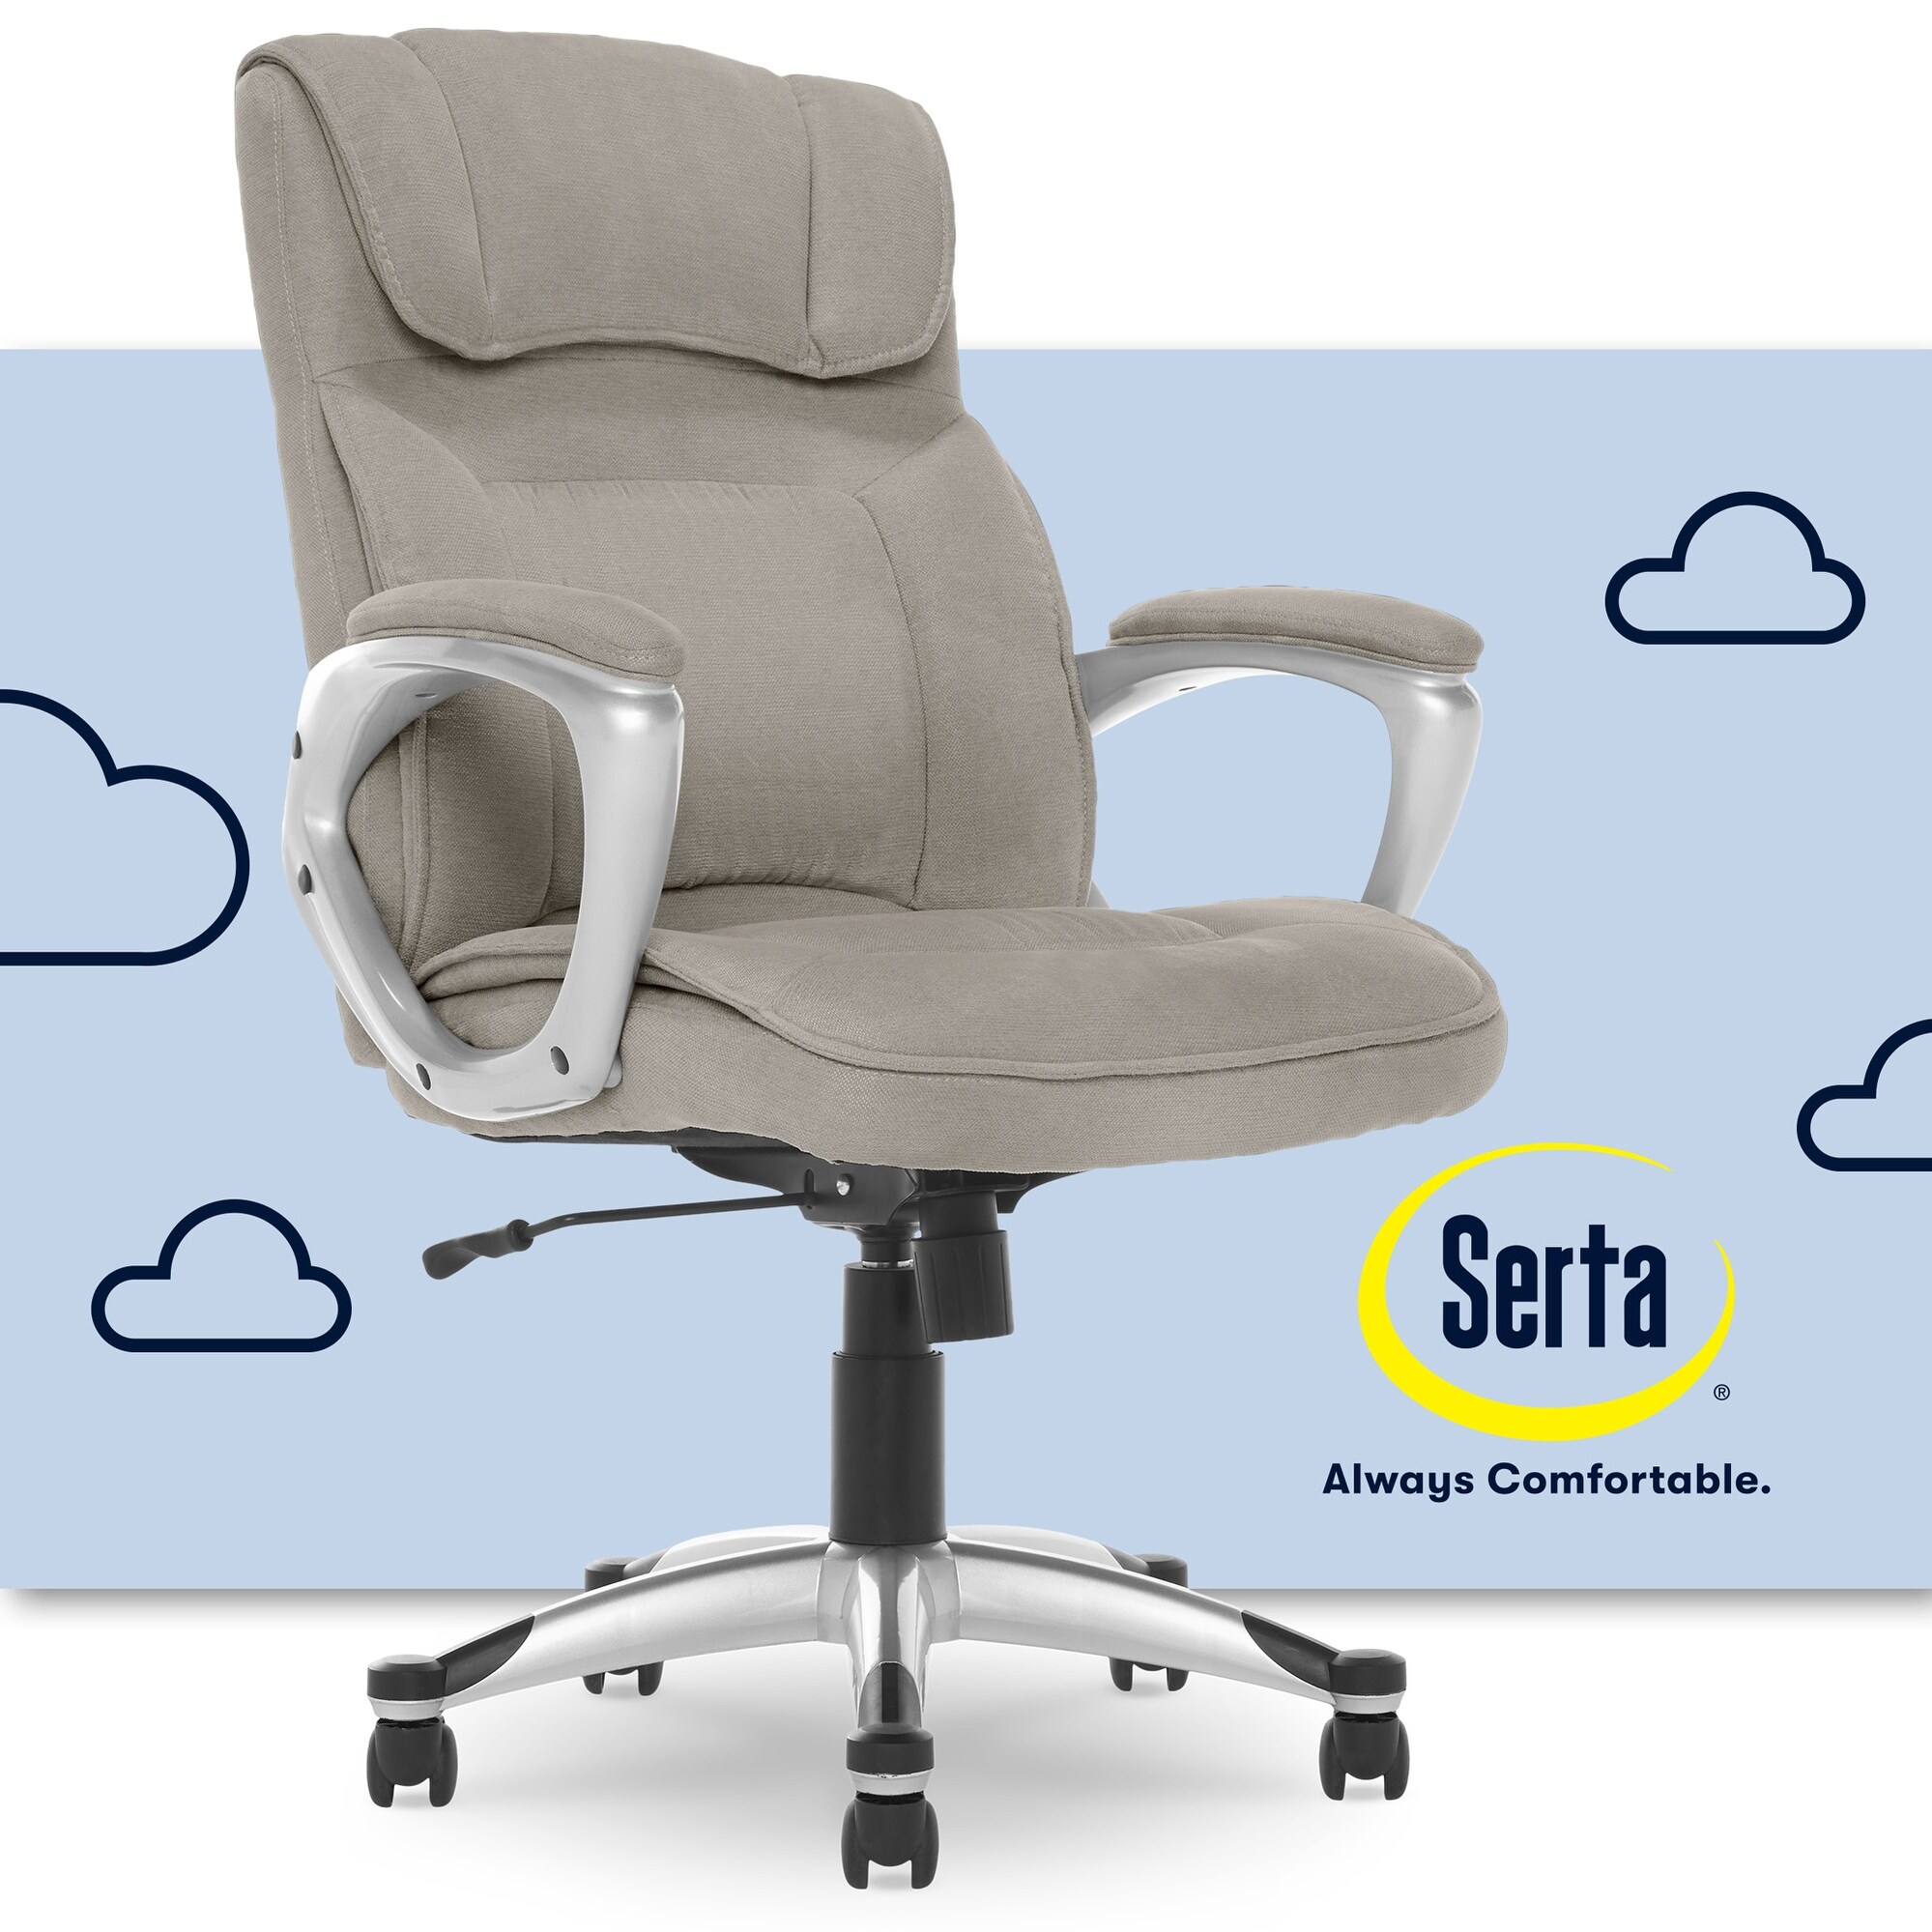 Best Buy: Serta Hannah Upholstered Executive Office Chair with